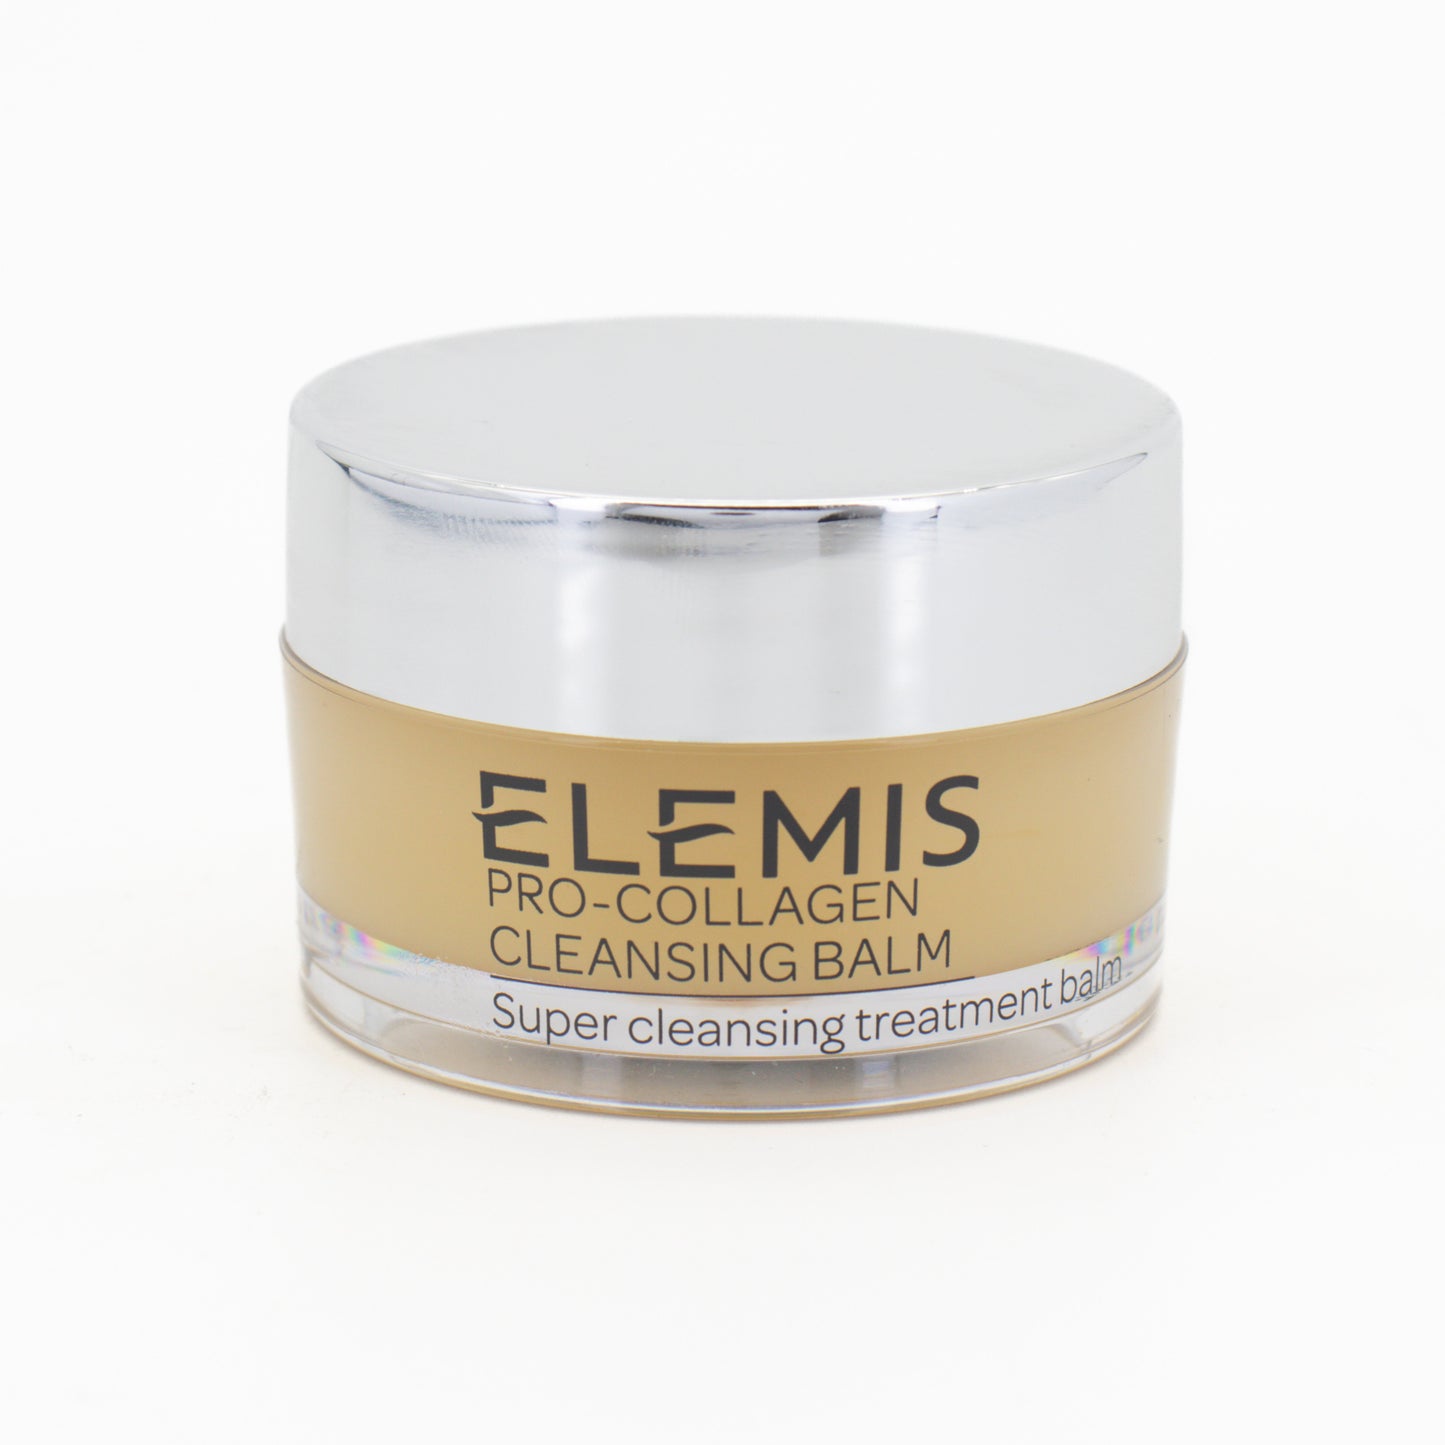 Elemis Pro-Collagen Cleansing Balm 20g - Imperfect Container